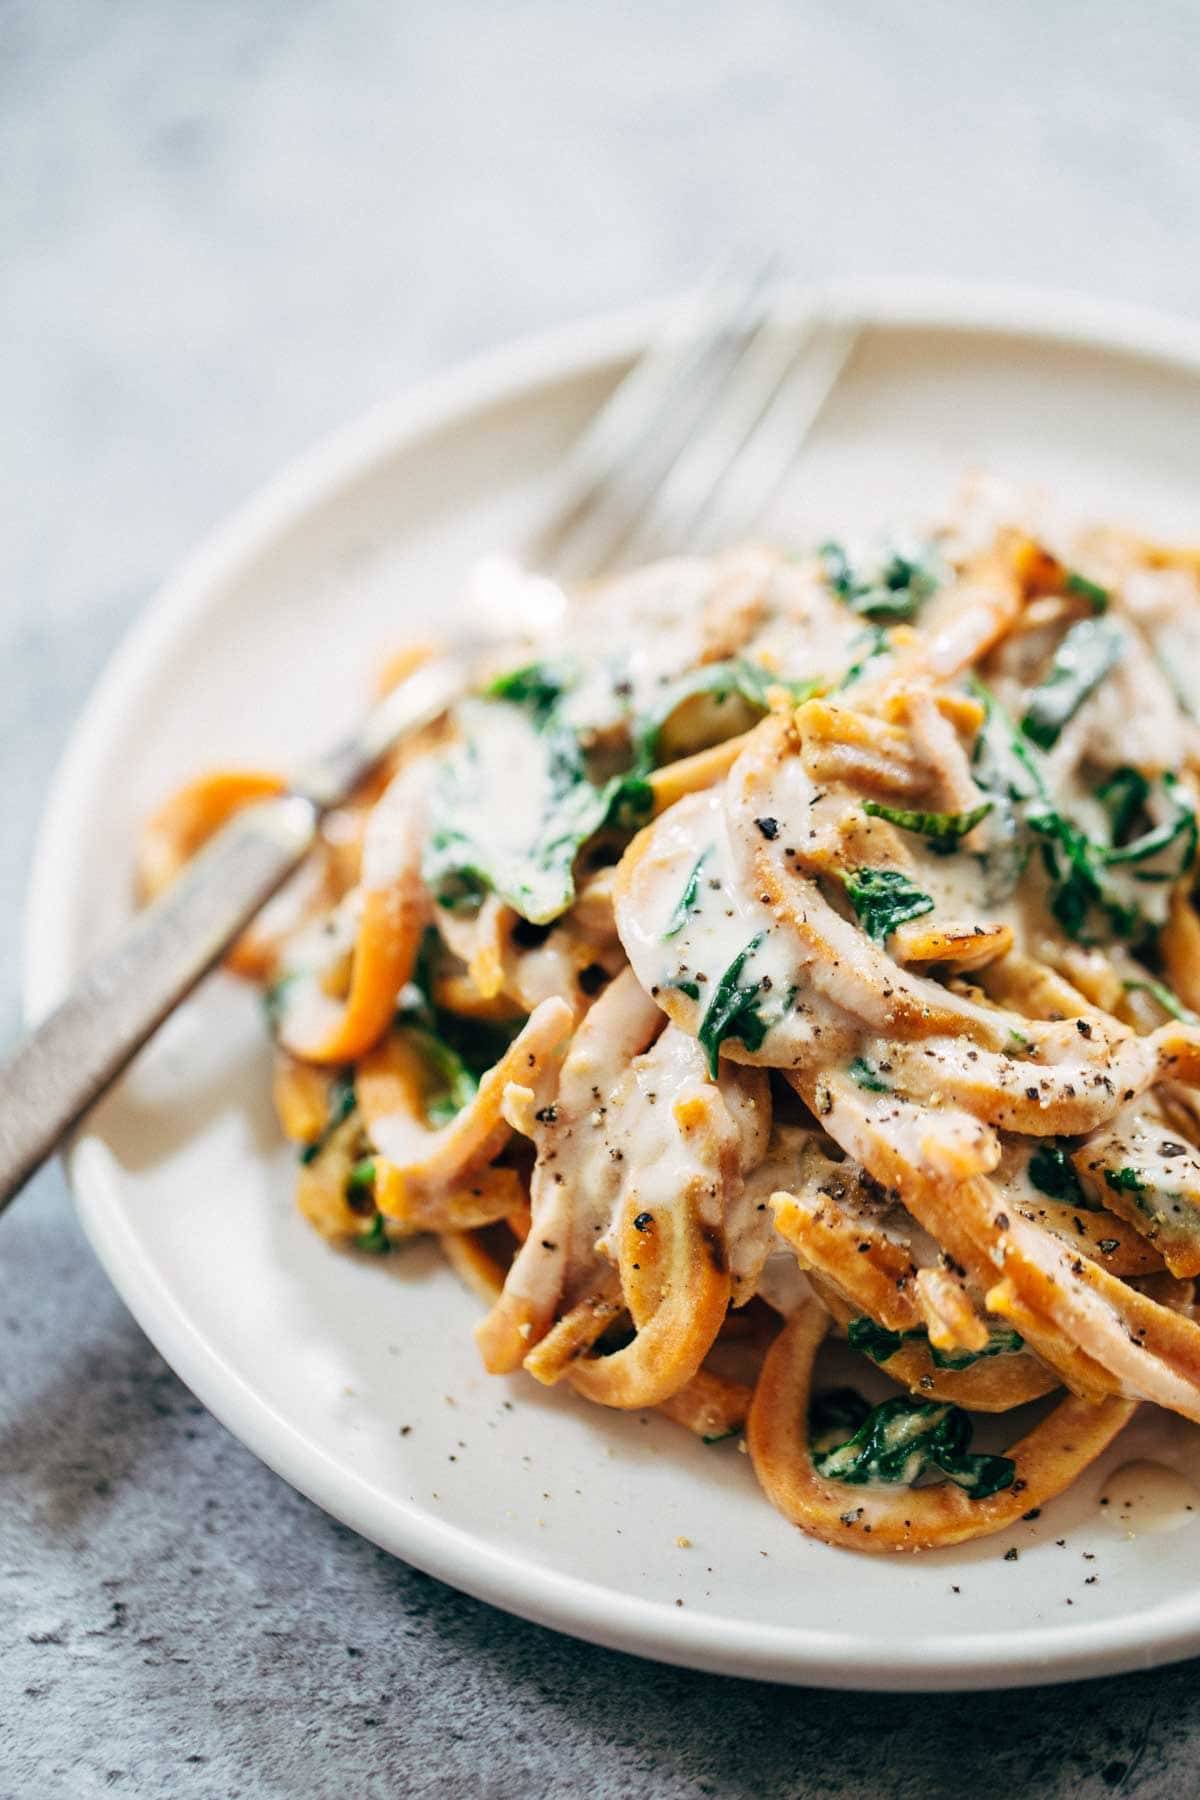 Creamy Spinach and Sweet Potato Noodles with Cashew Sauce - easy to make, adaptable, gluten free, vegan. Devine and delicious! | pinchofyum.com